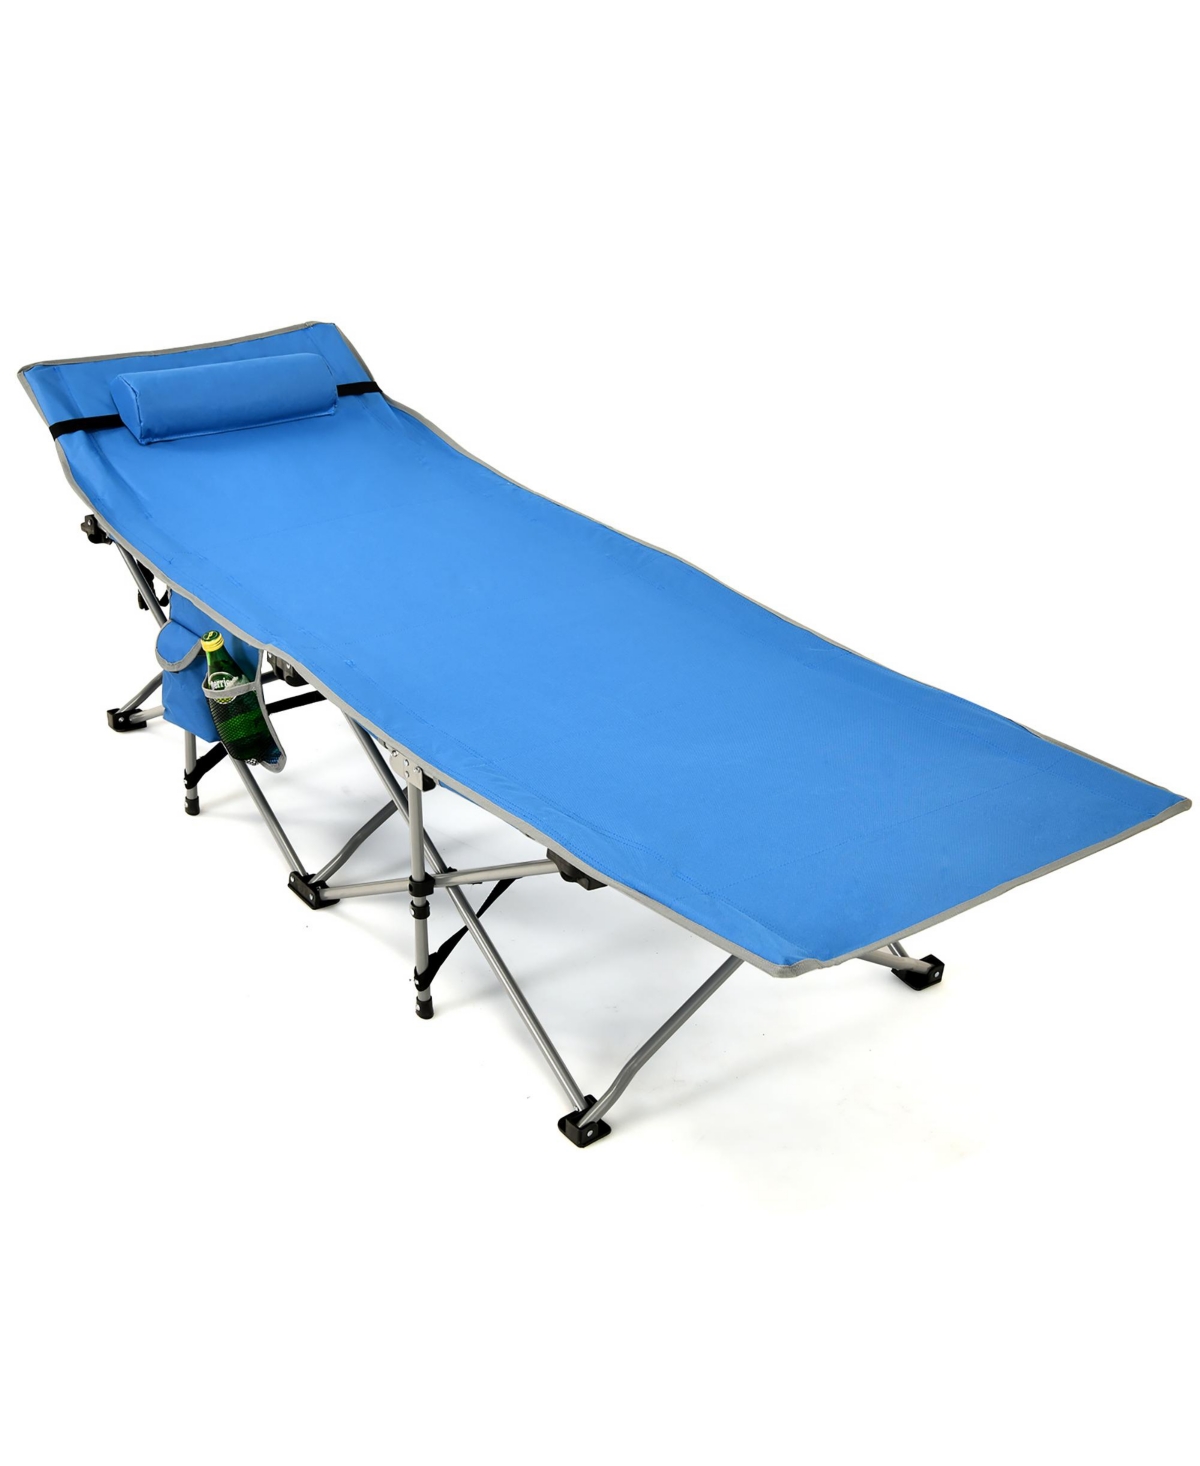 Camping Cot Heavy-Duty Outdoor Cot Bed w/ Side Storage Pocket - Green